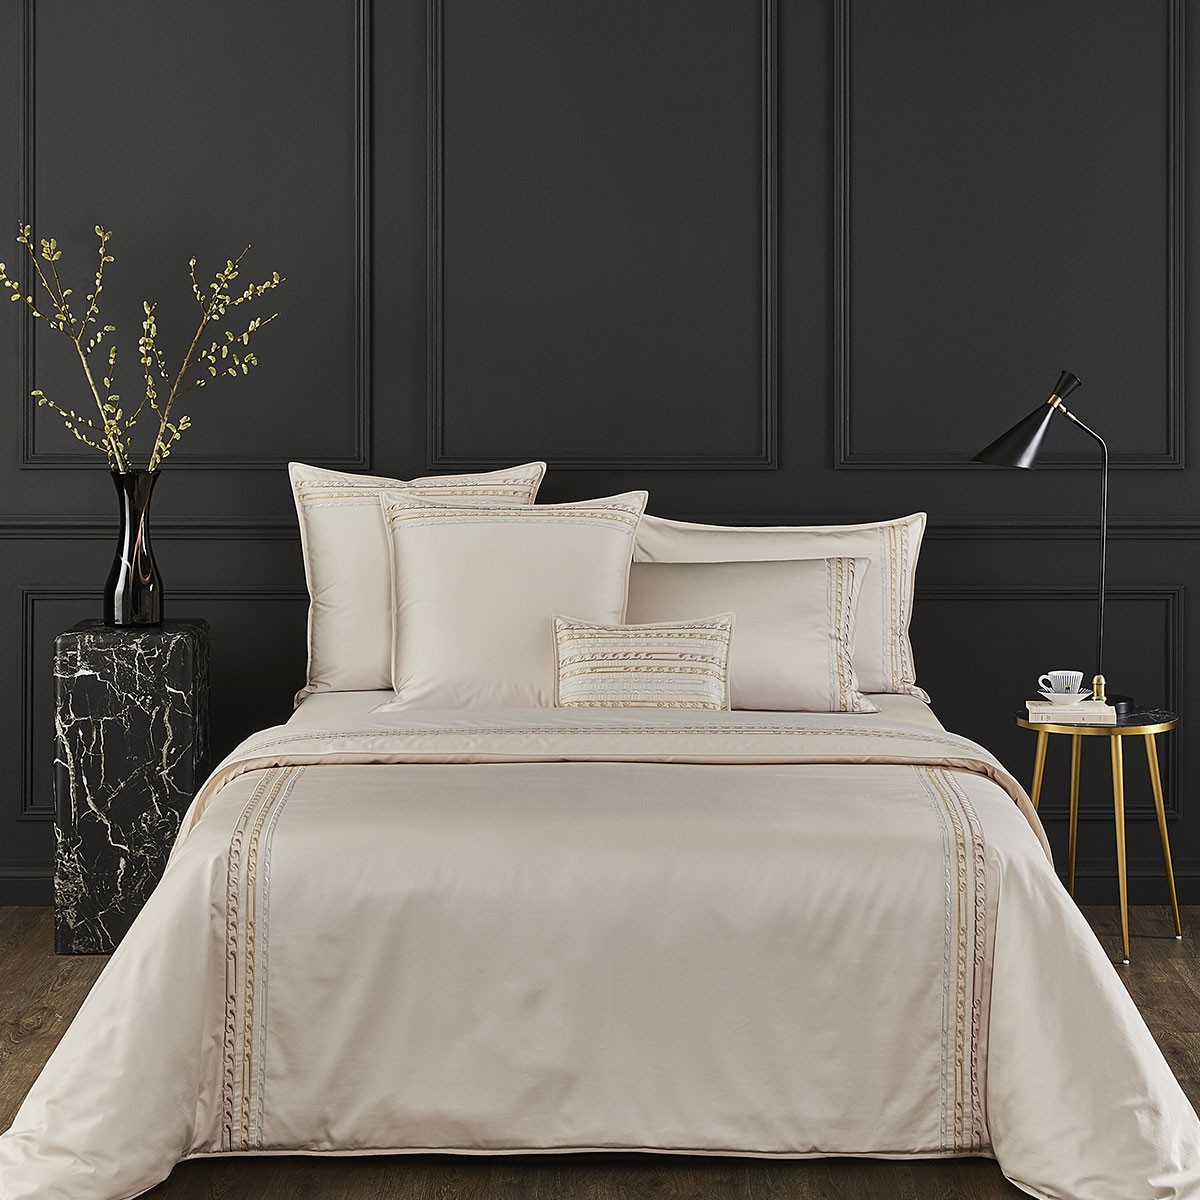 Yves Delorme Couture Régates Bed Collection - Yves Delorme Luxury